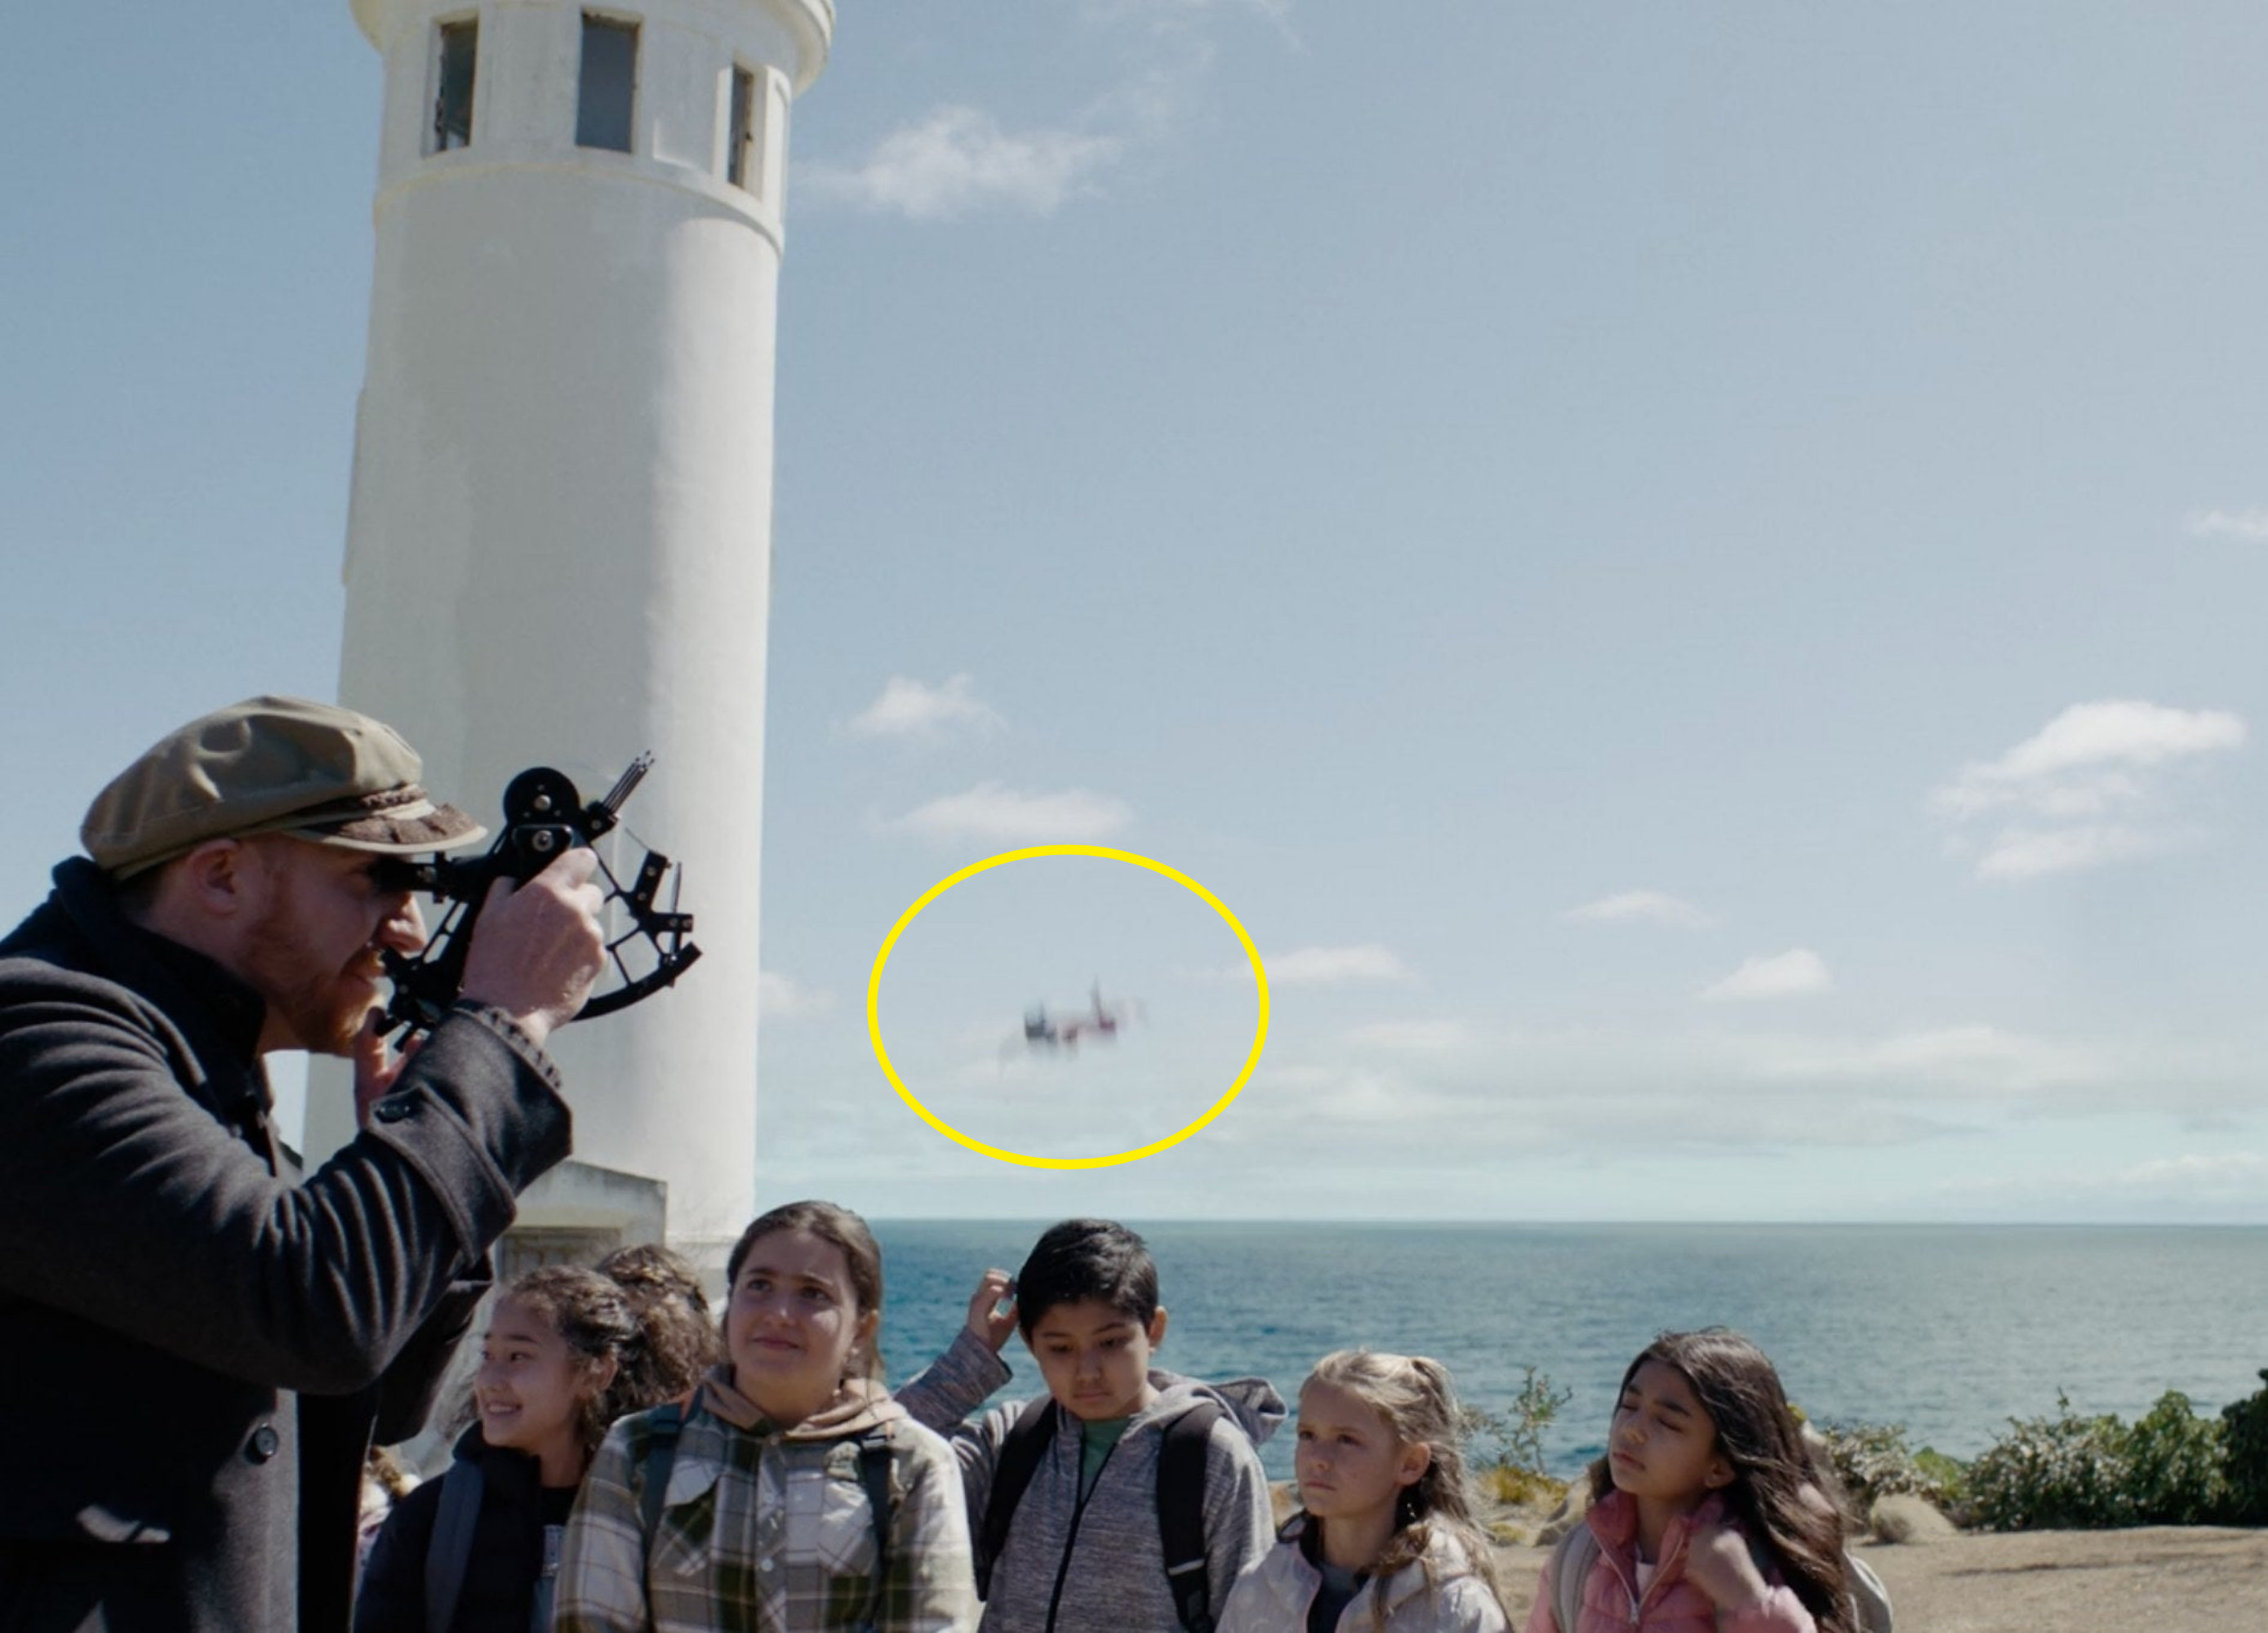 A lighthouse keeper showing off equipment to a group of school children while their teacher falls from a lighthouse to her death in the background